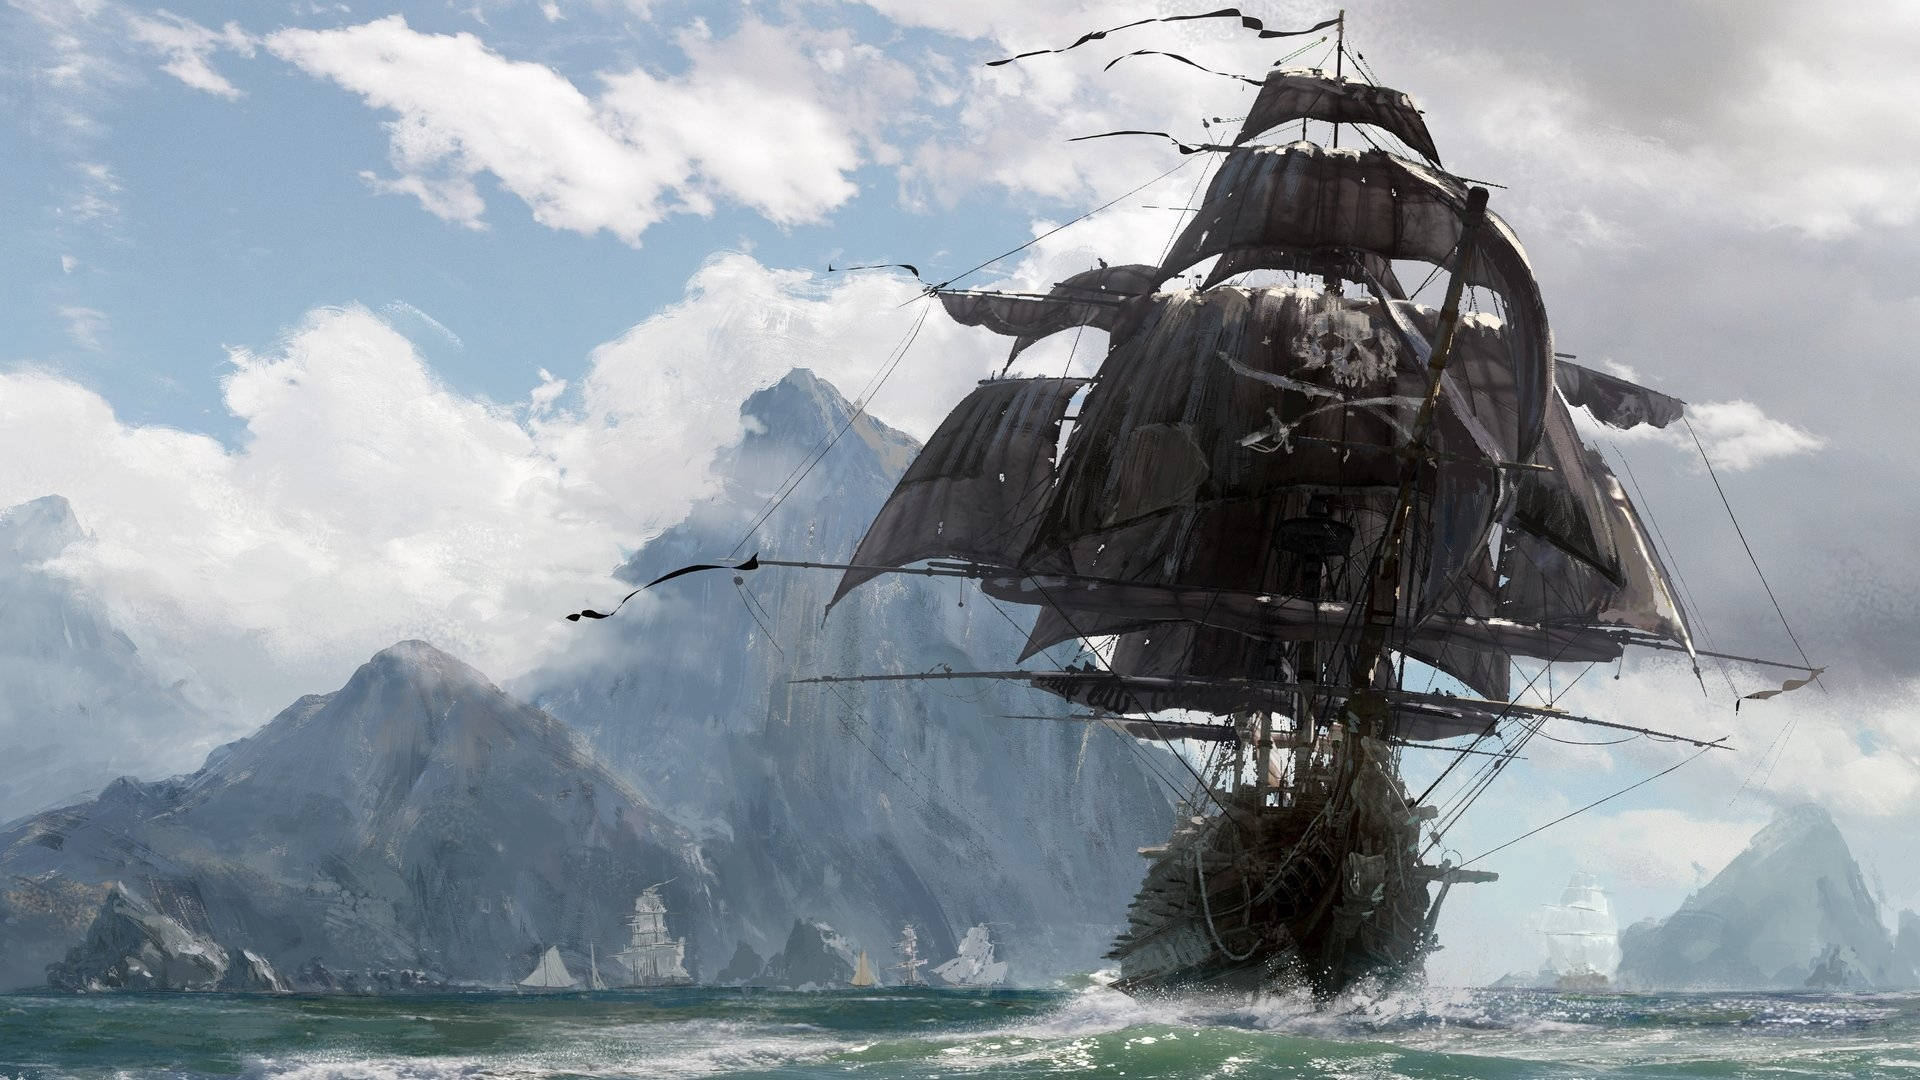 https://wallpapers.com/images/featured/pirate-ship-pictures-v7qo6pj8pn3gvdfn.jpg